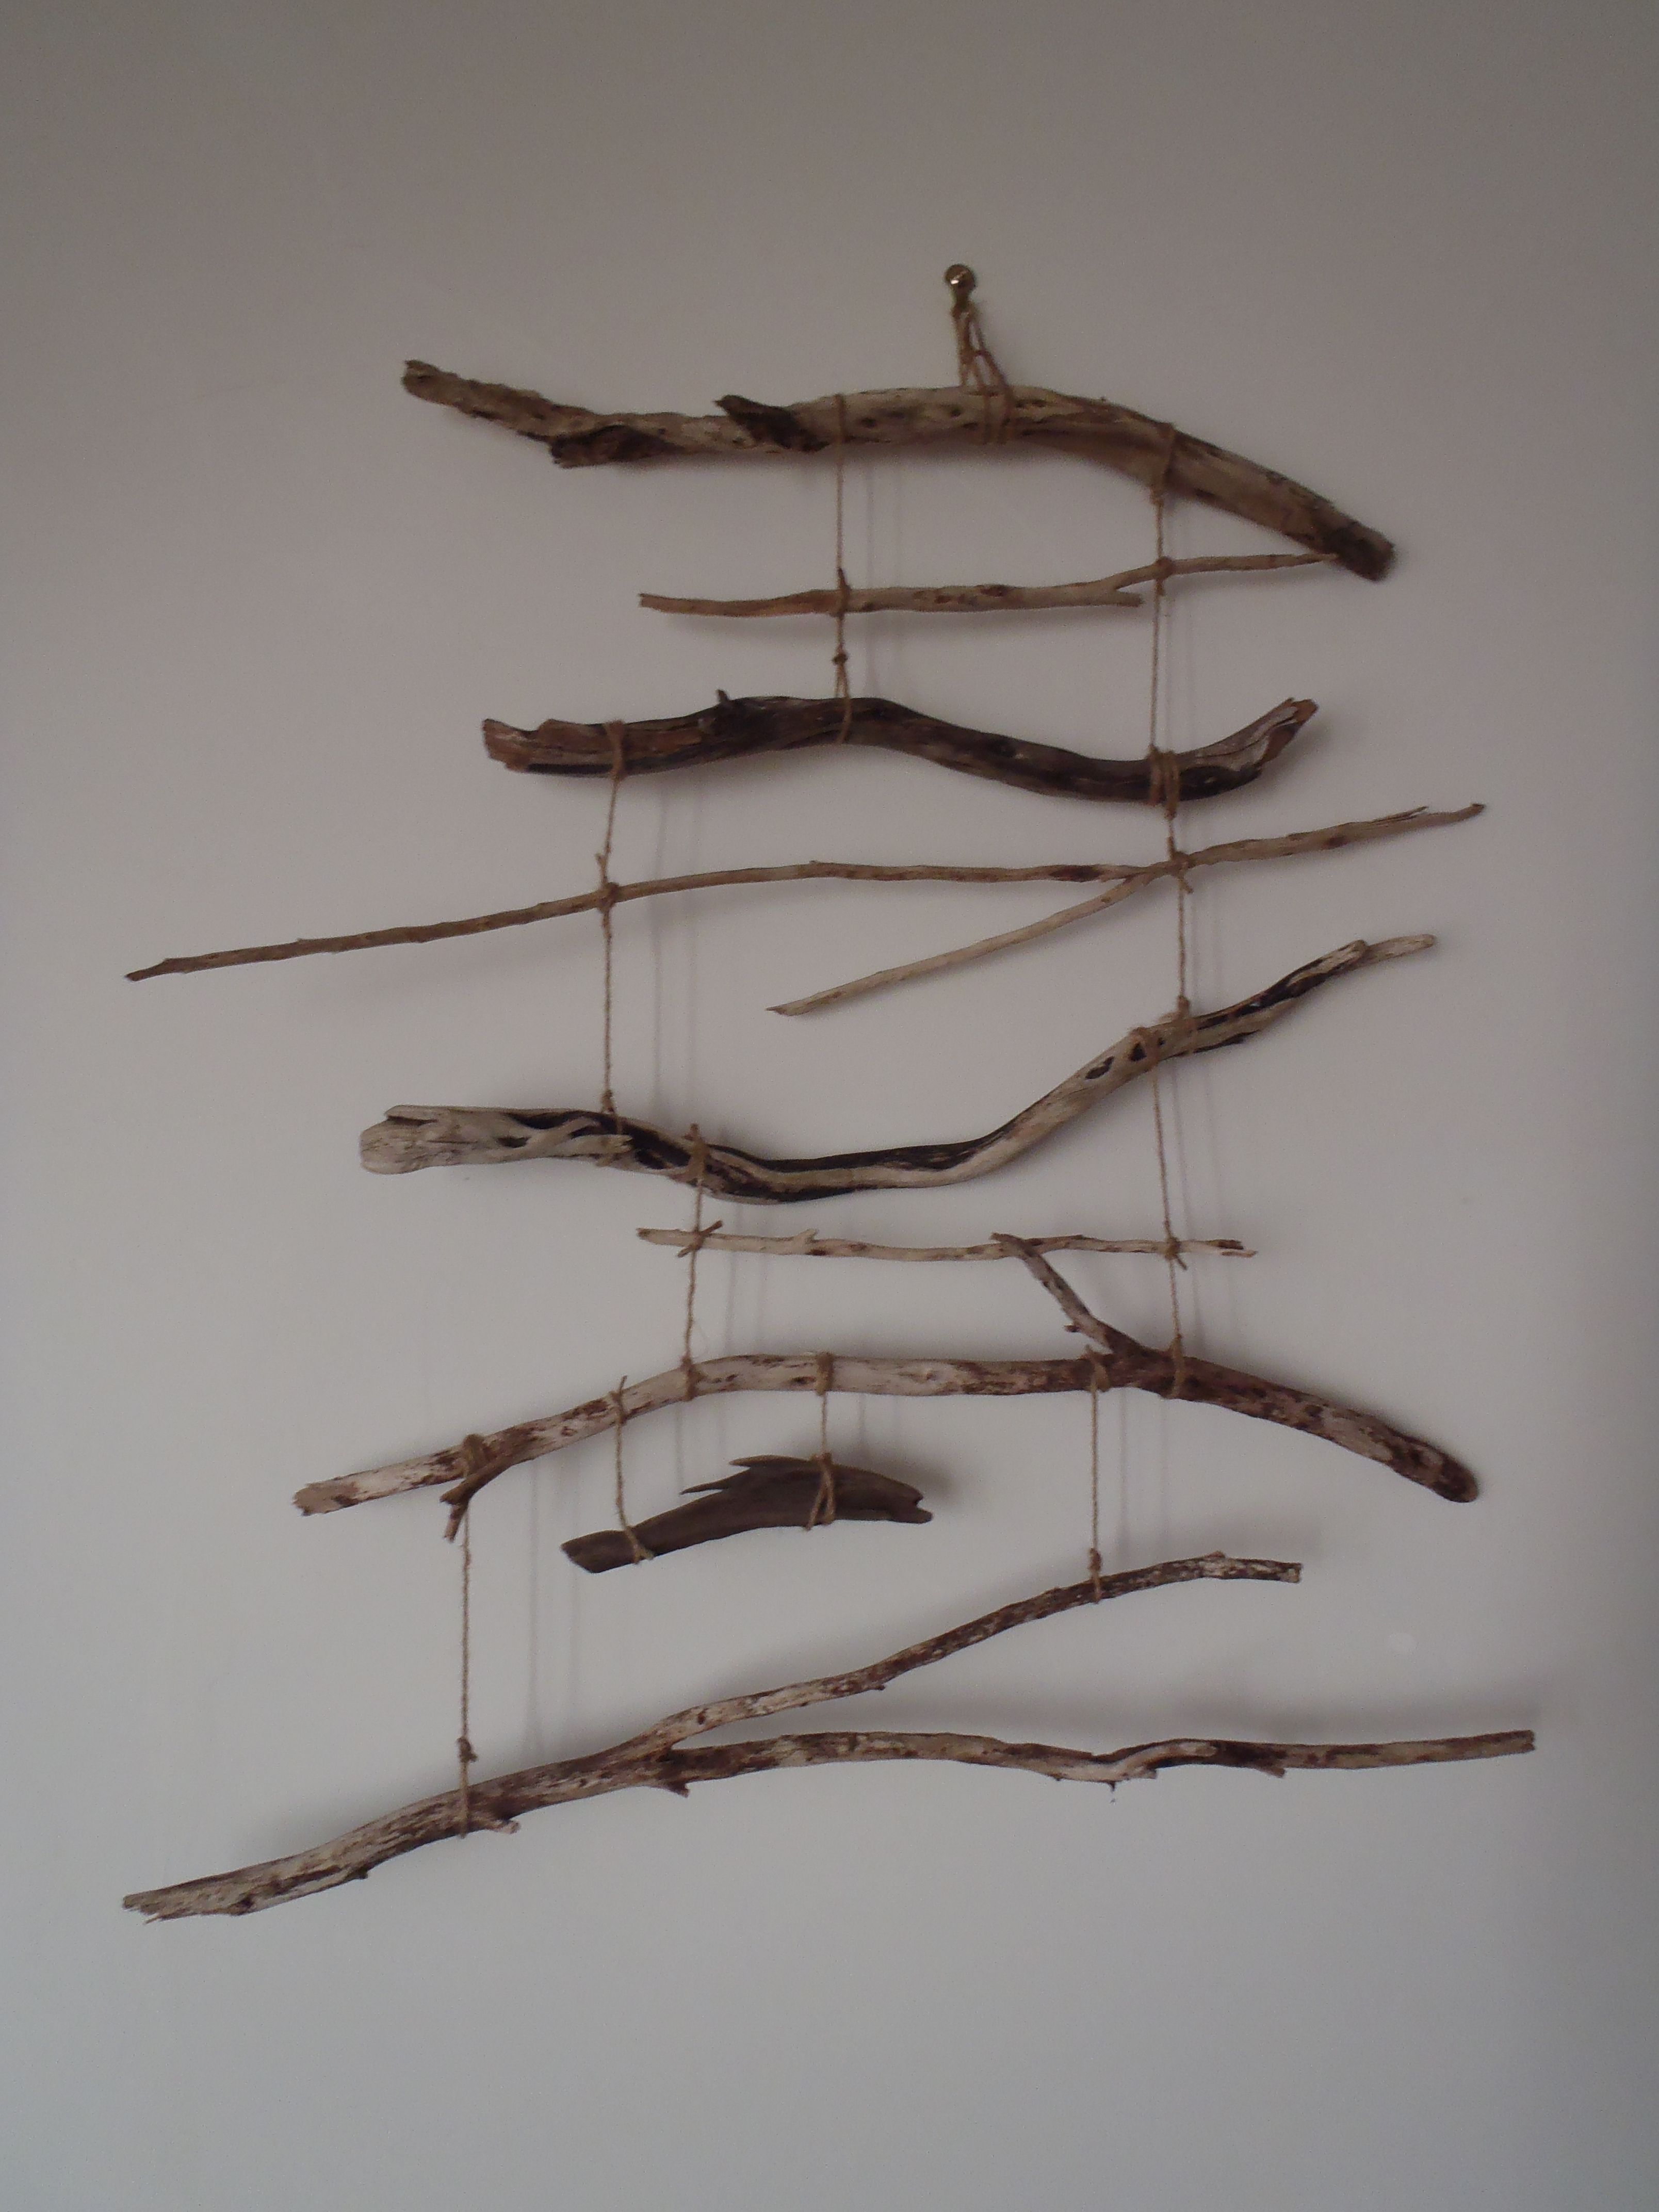 Preferred Driftwood Wall Art For Sale With Regard To Driftwood Wall Art Mecox Gardens (View 10 of 15)